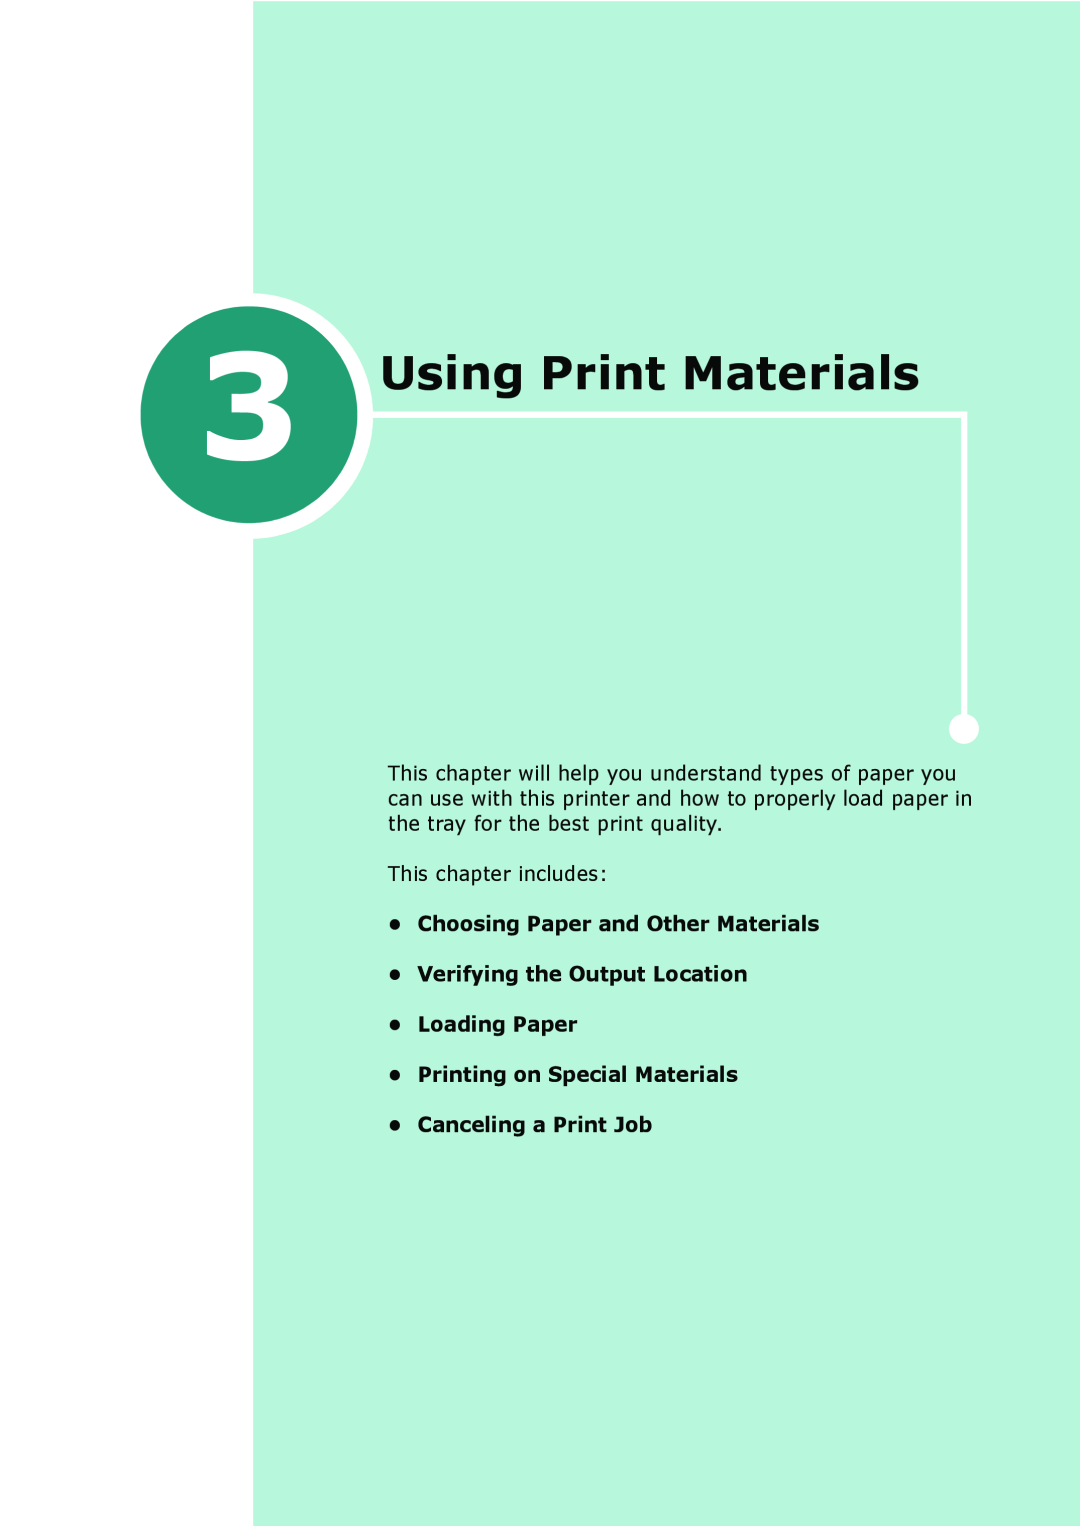 Samsung ML-1610 manual 3Using Print Materials, Choosing Paper and Other Materials Verifying the Output Location 